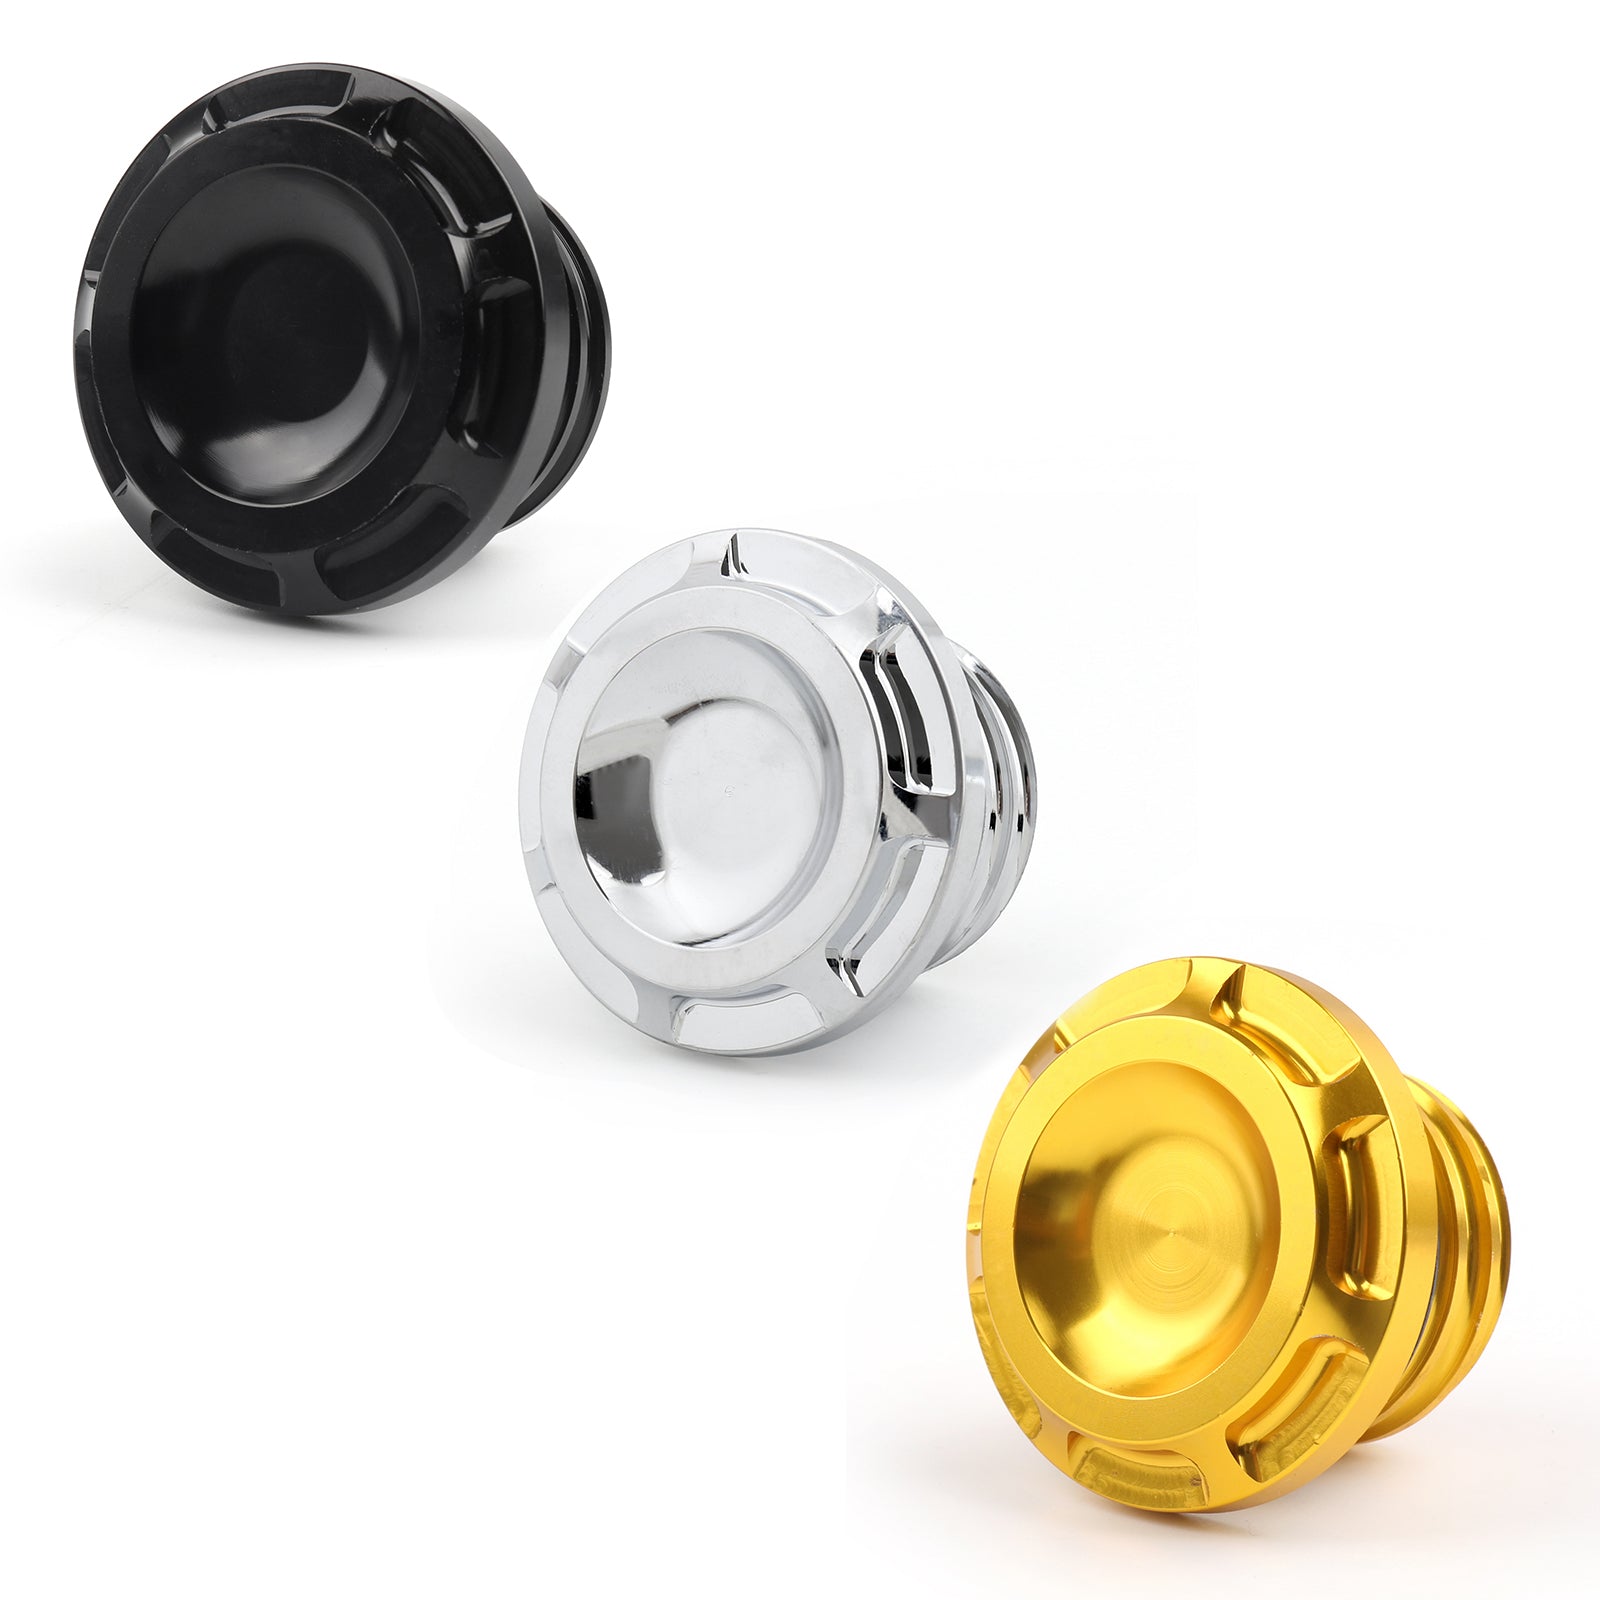 Aluminum Metal Fuel Gas Tank Oil Cap Cover For Harley Motorcycle 1996-UP